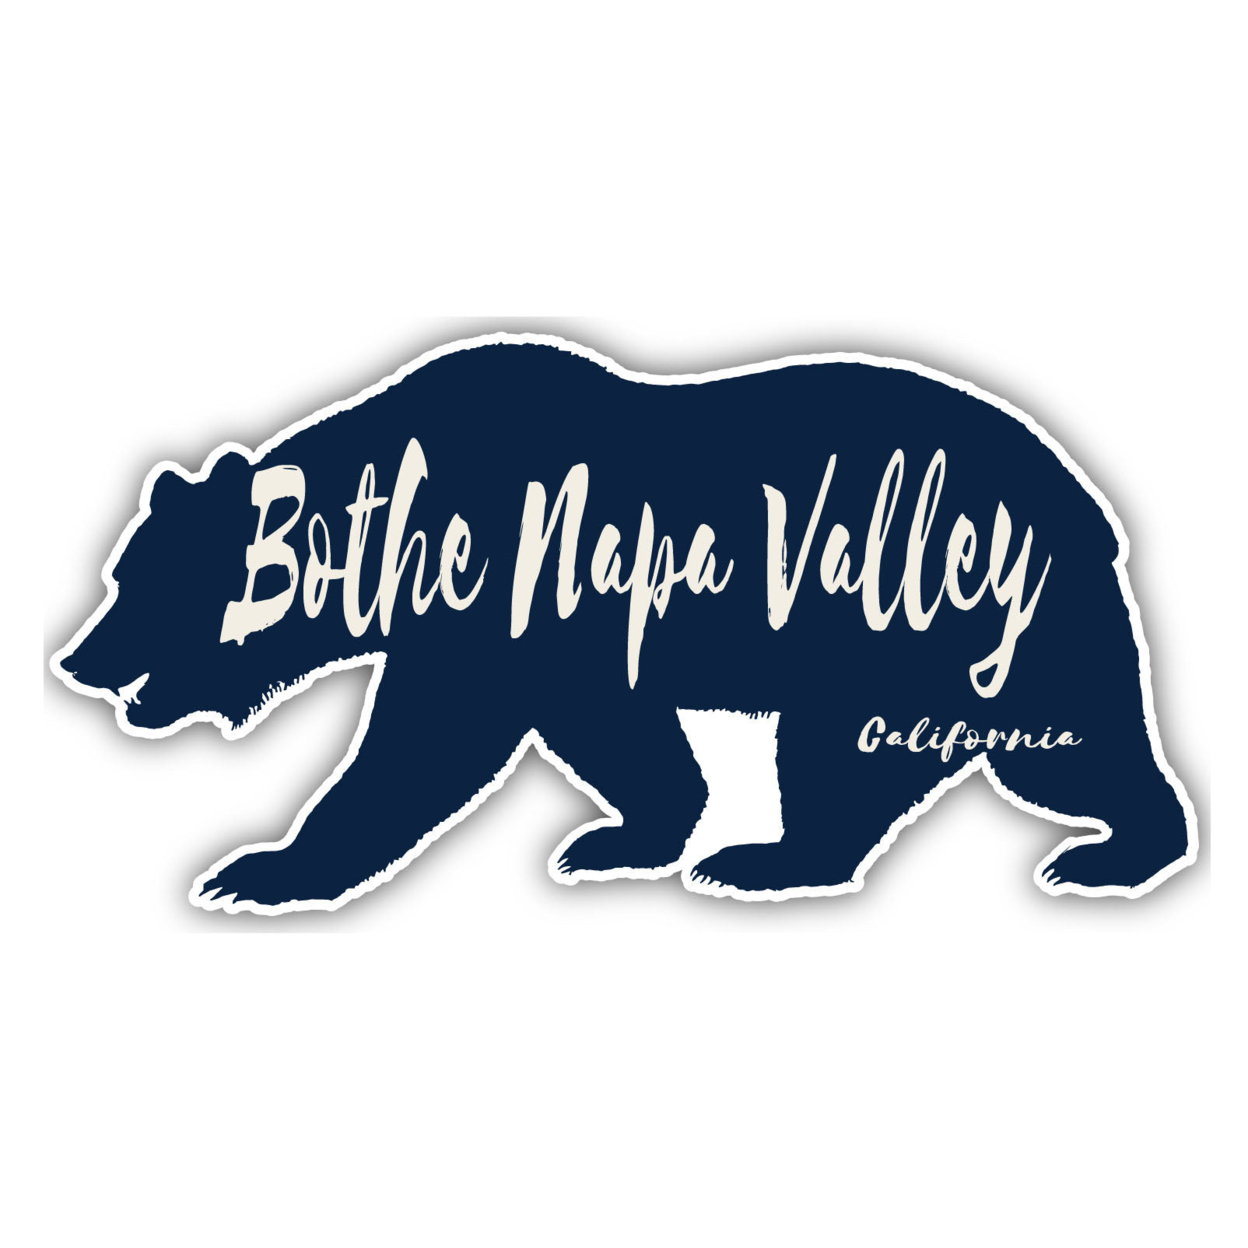 Bothe Napa Valley California Souvenir Decorative Stickers (Choose Theme And Size) - 4-Pack, 2-Inch, Bear